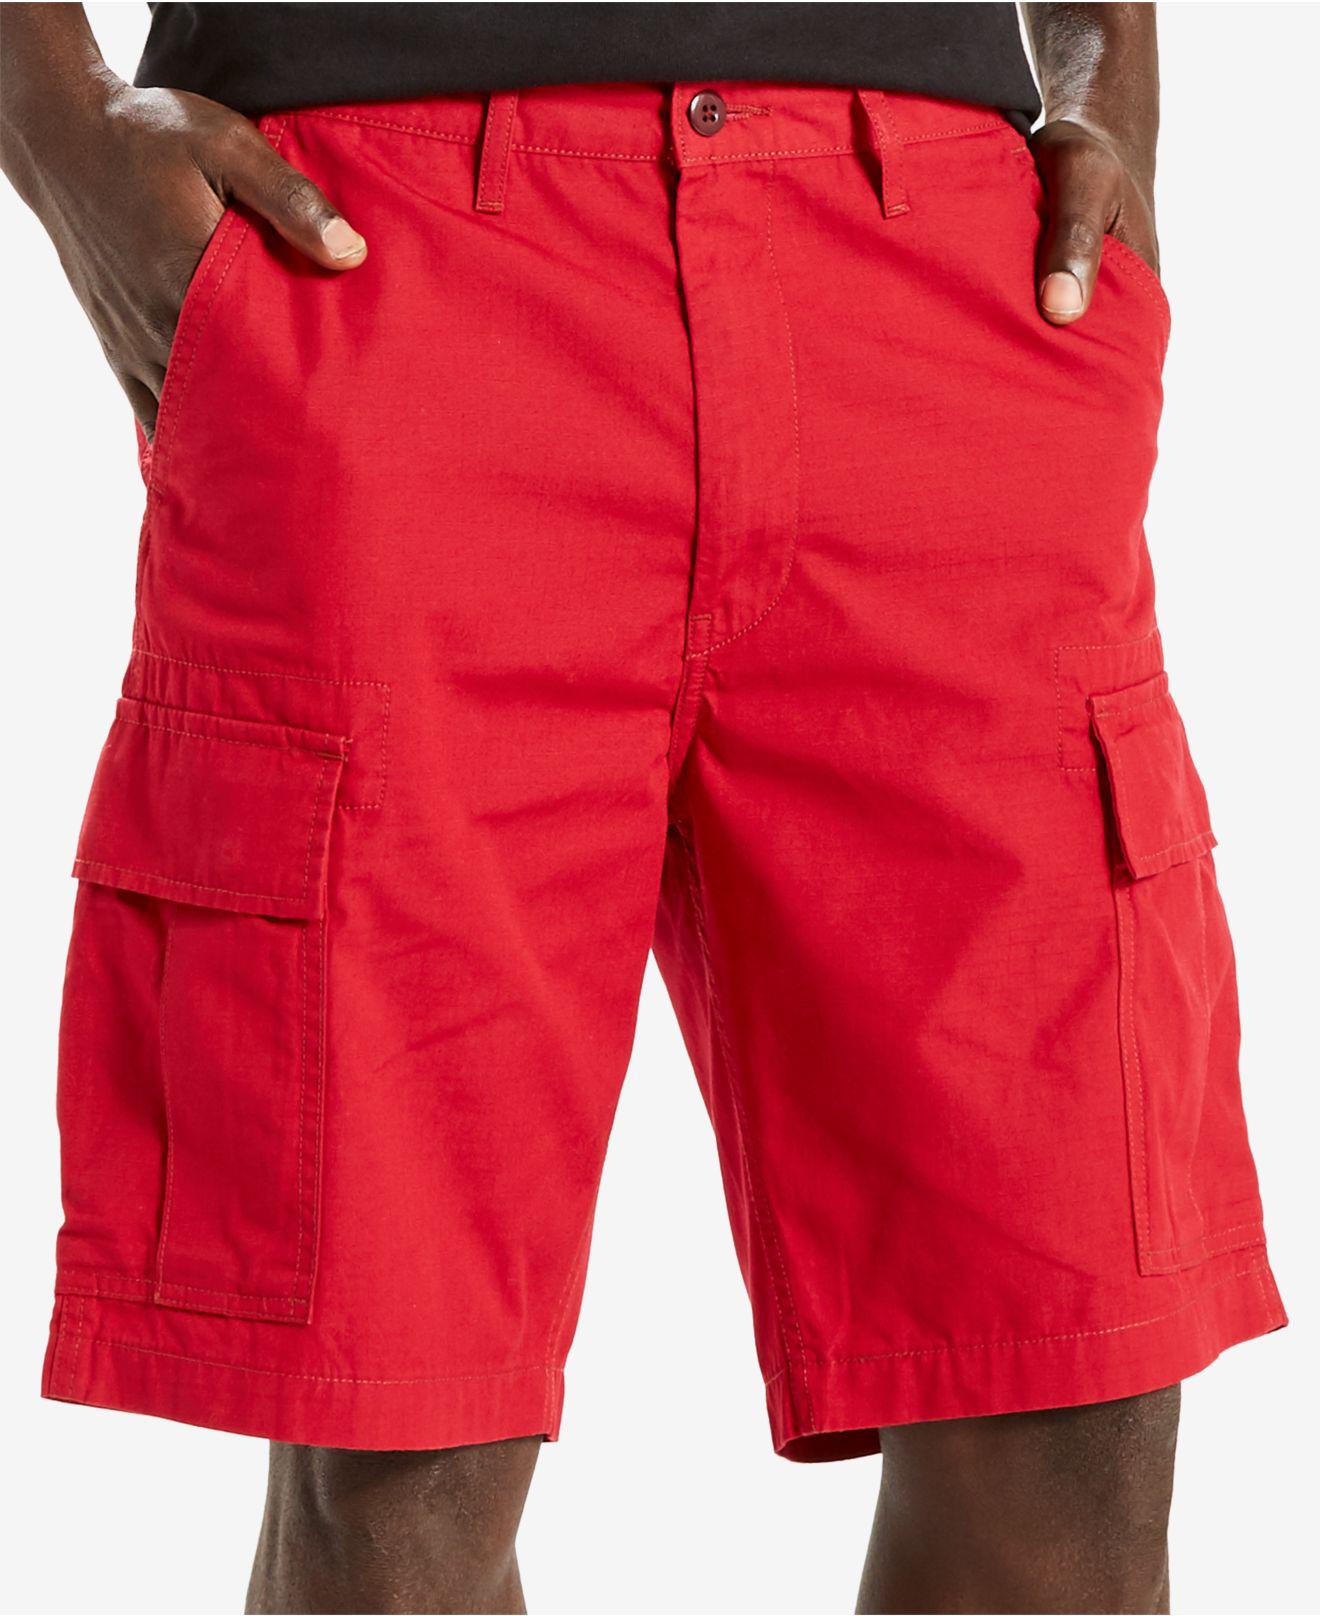 Lyst - Levi's Carrier Cargo Shorts in Red for Men